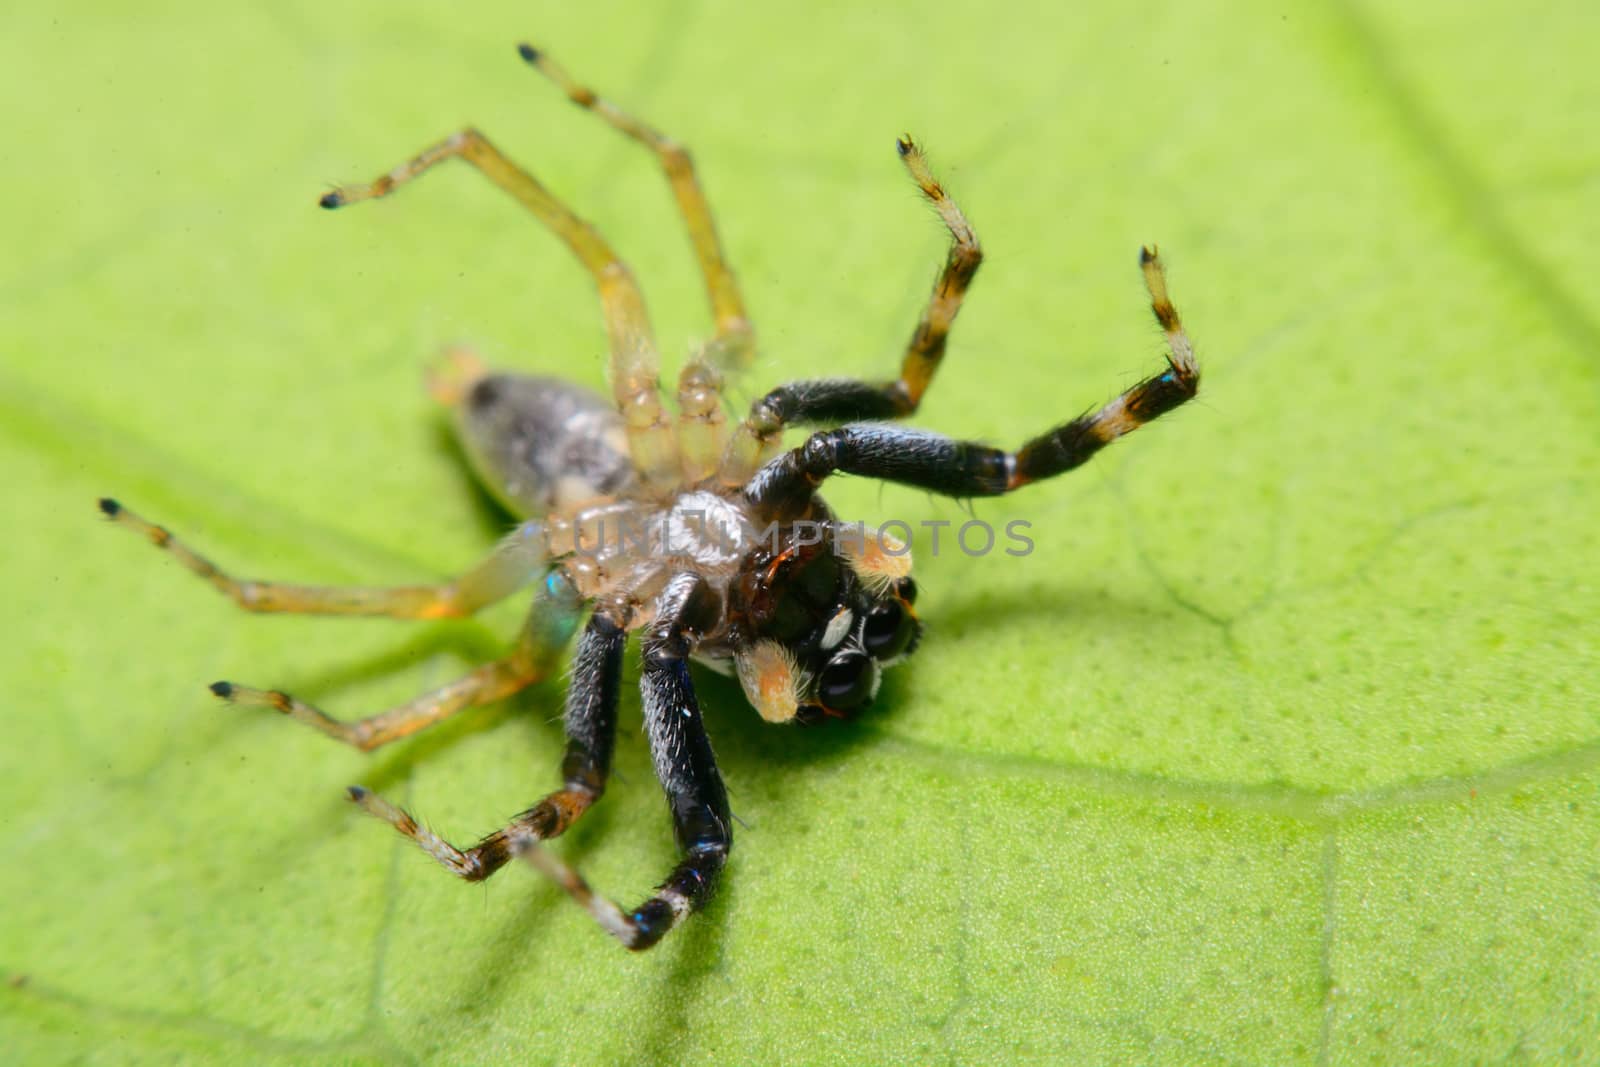 Close-up of a Jumping Spider.